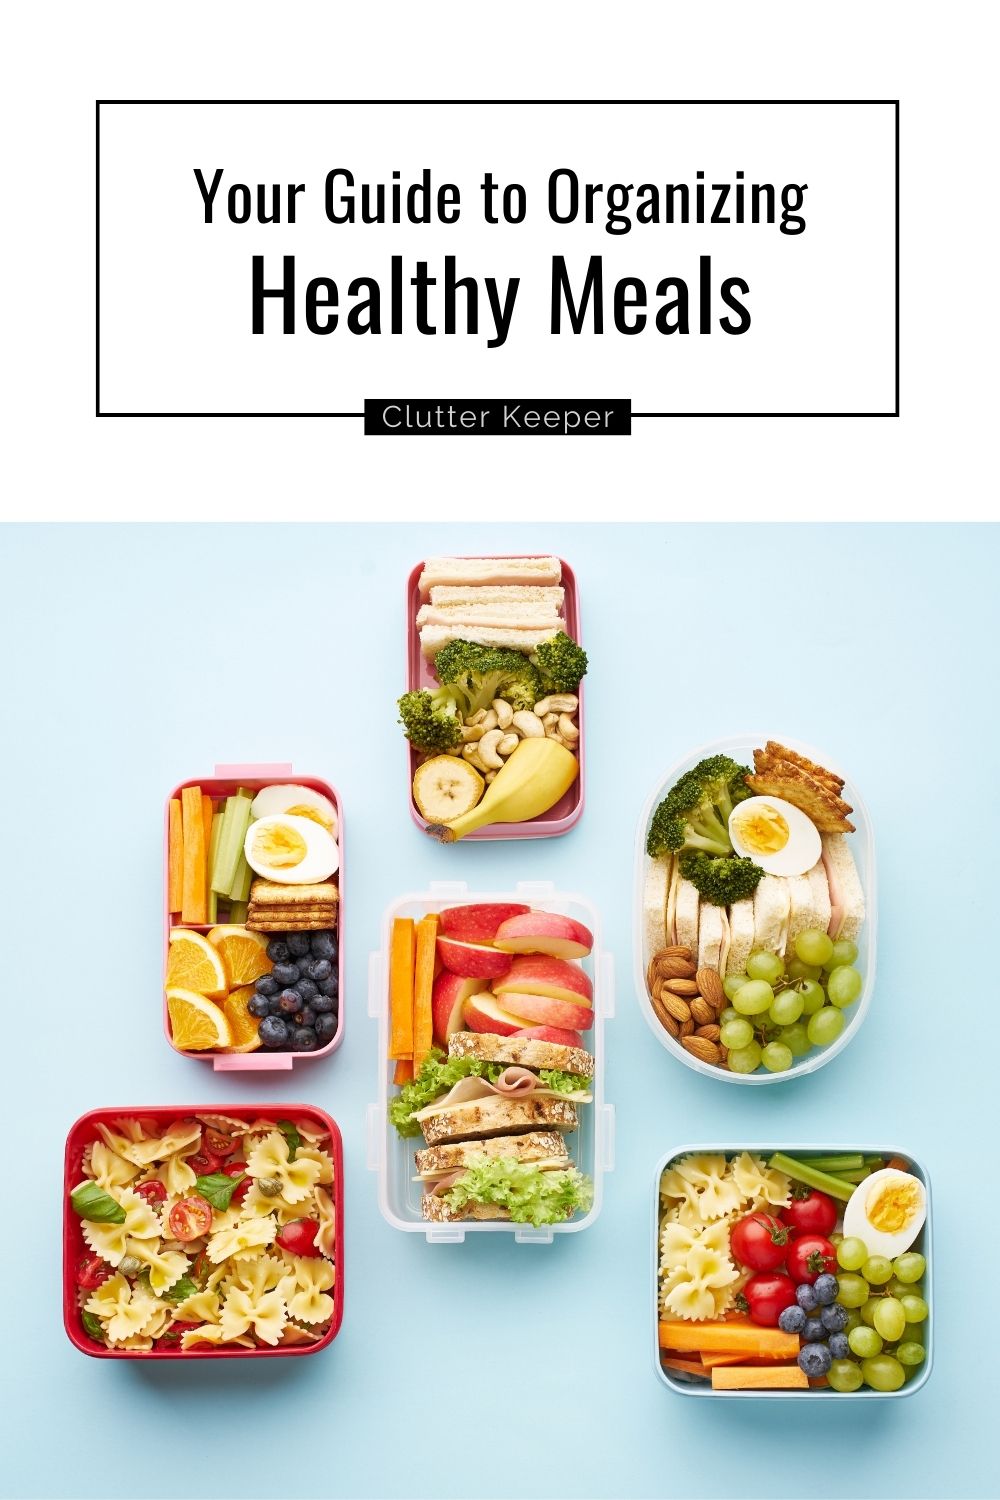 Containers of meal prep foods divided into 6 boxes of healthy lunch/snacks including fruit, vegetables, sandwiches, and pasta.